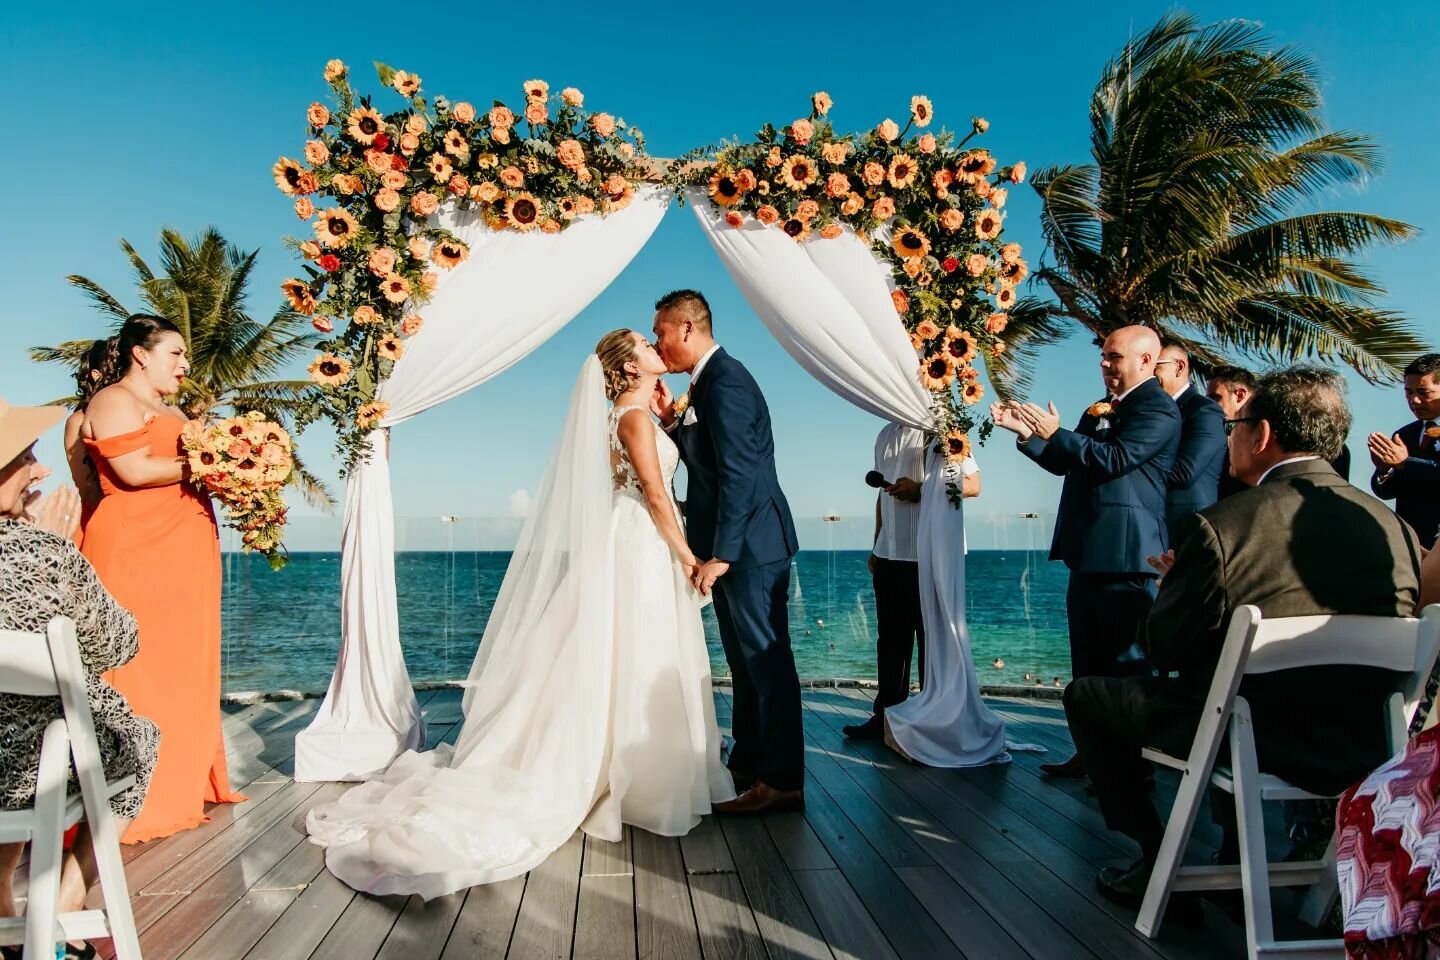 What a beautiful ceremony this was overlooking the ocean @dreamstulum 😍

.
.
.
#dreamstulum #dreamstulumresortandspa #dreamstulumwedding #tulumweddingphotographer #tulumwedding #rivieramayaweddingphotographer #cancunweddingphotographer #playadelcarm